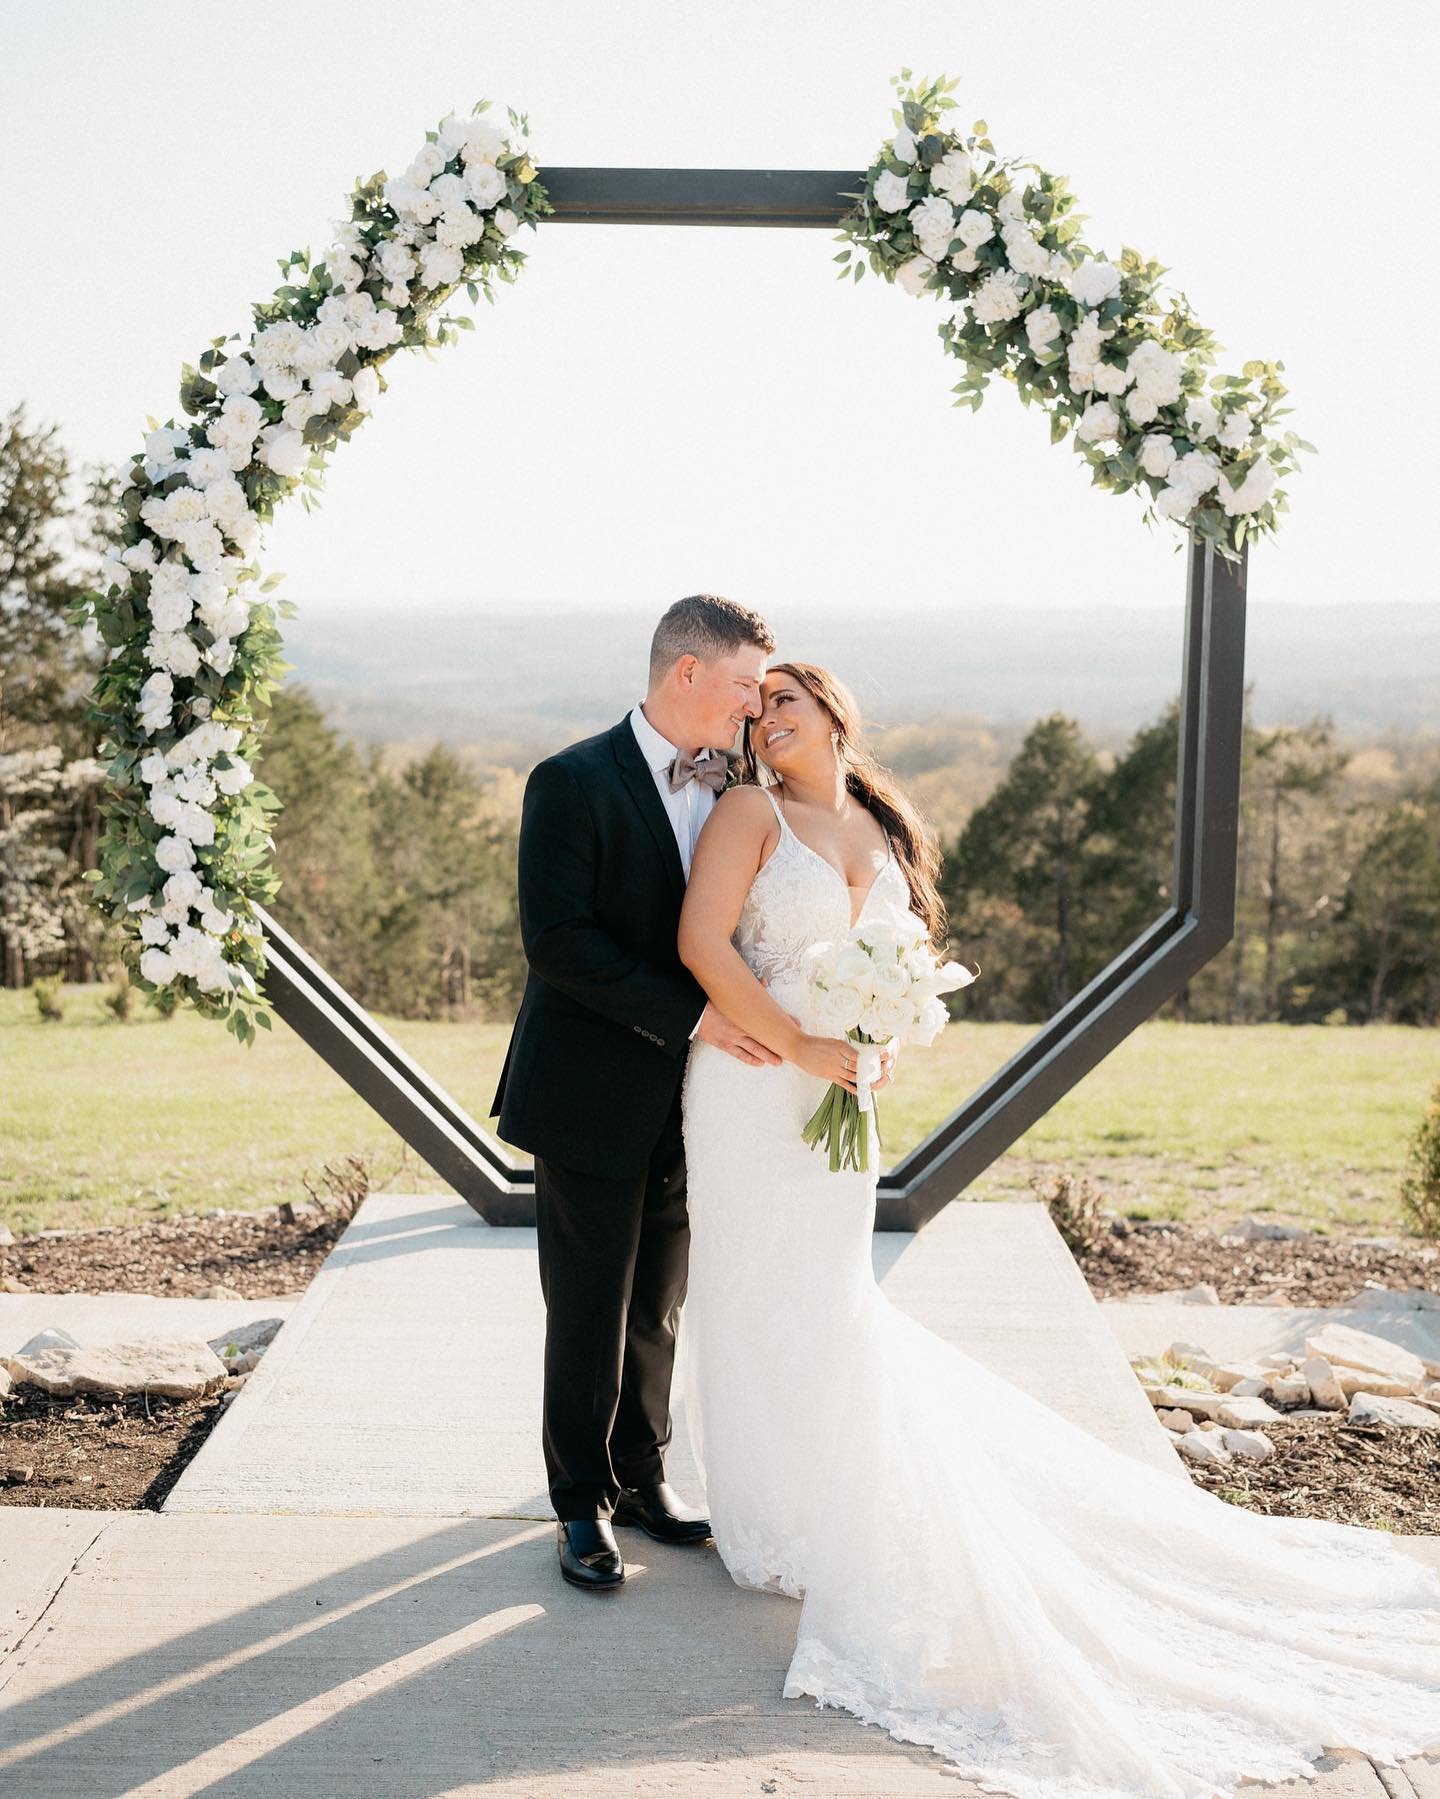 Kevin &amp; Morgan kicked off my spring wedding season! It was windy, but we couldn&rsquo;t have asked for a more stunning day all around! These two were so fun to be around (as you can probably tell!) 

Venue - The Atrium; Wedding and Event Center
F